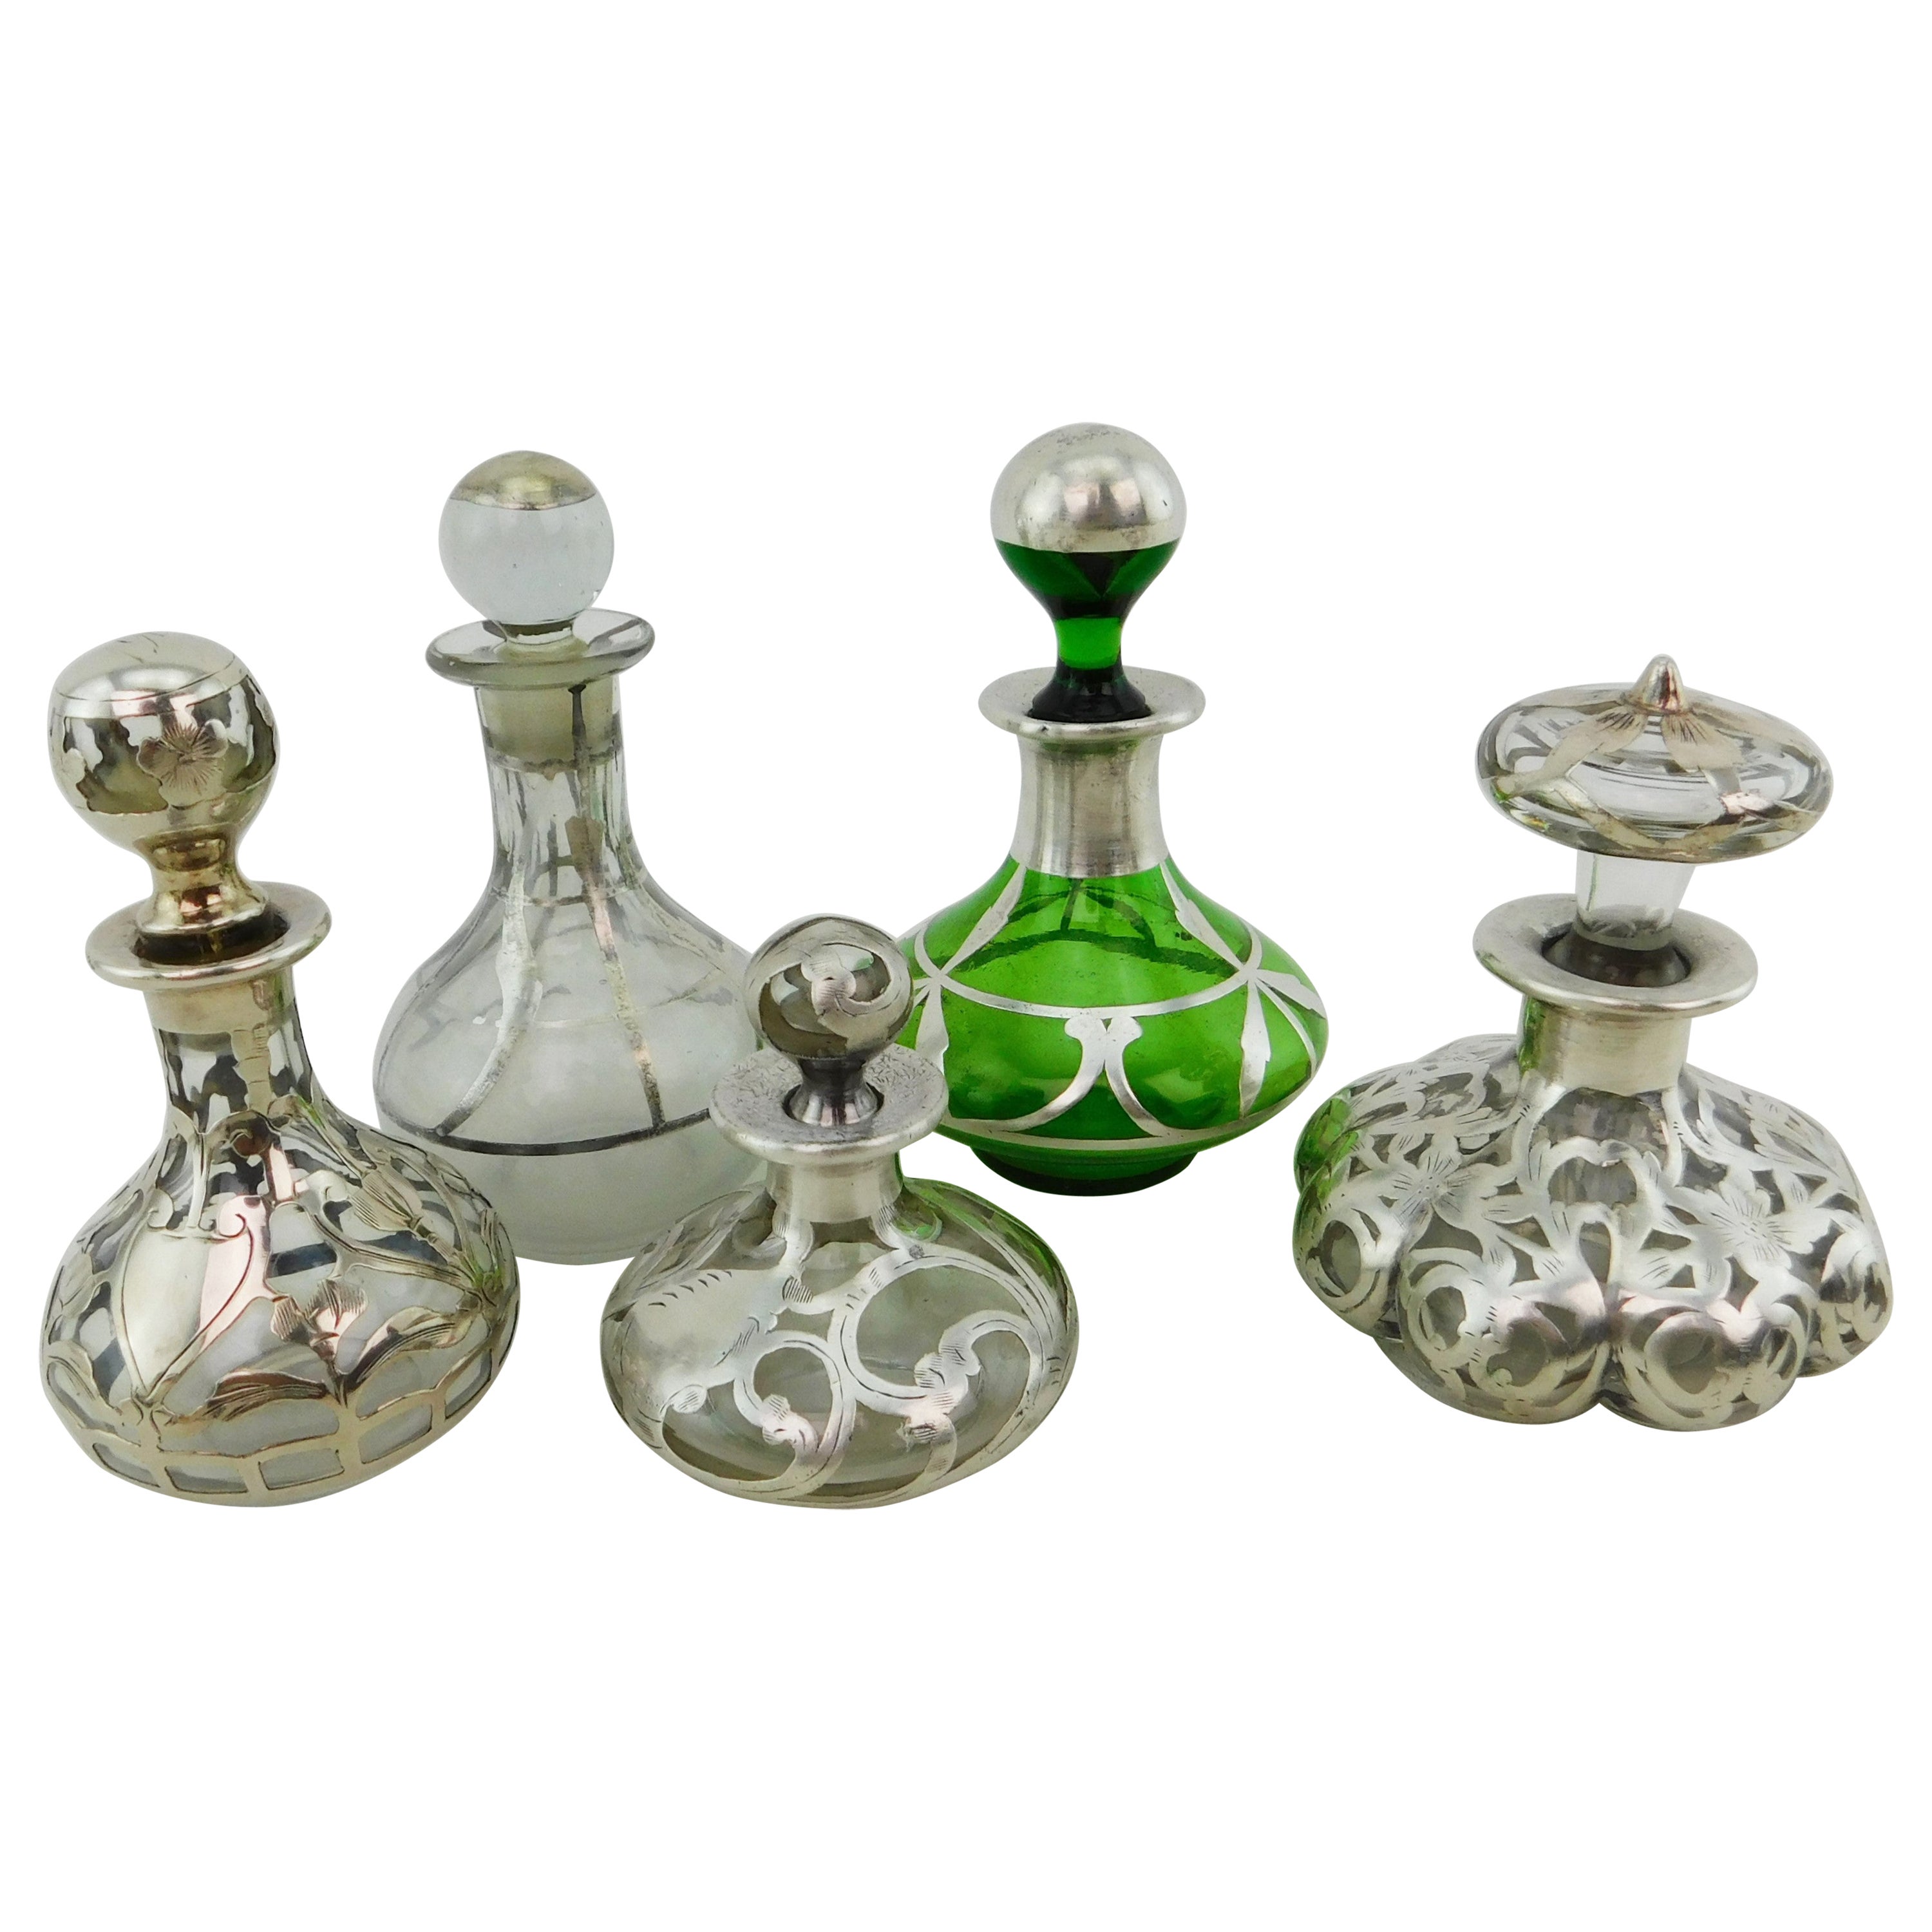 Five Art Nouveau Perfume Bottles circa 1900 Silver Overlay on Glass 19th Century For Sale